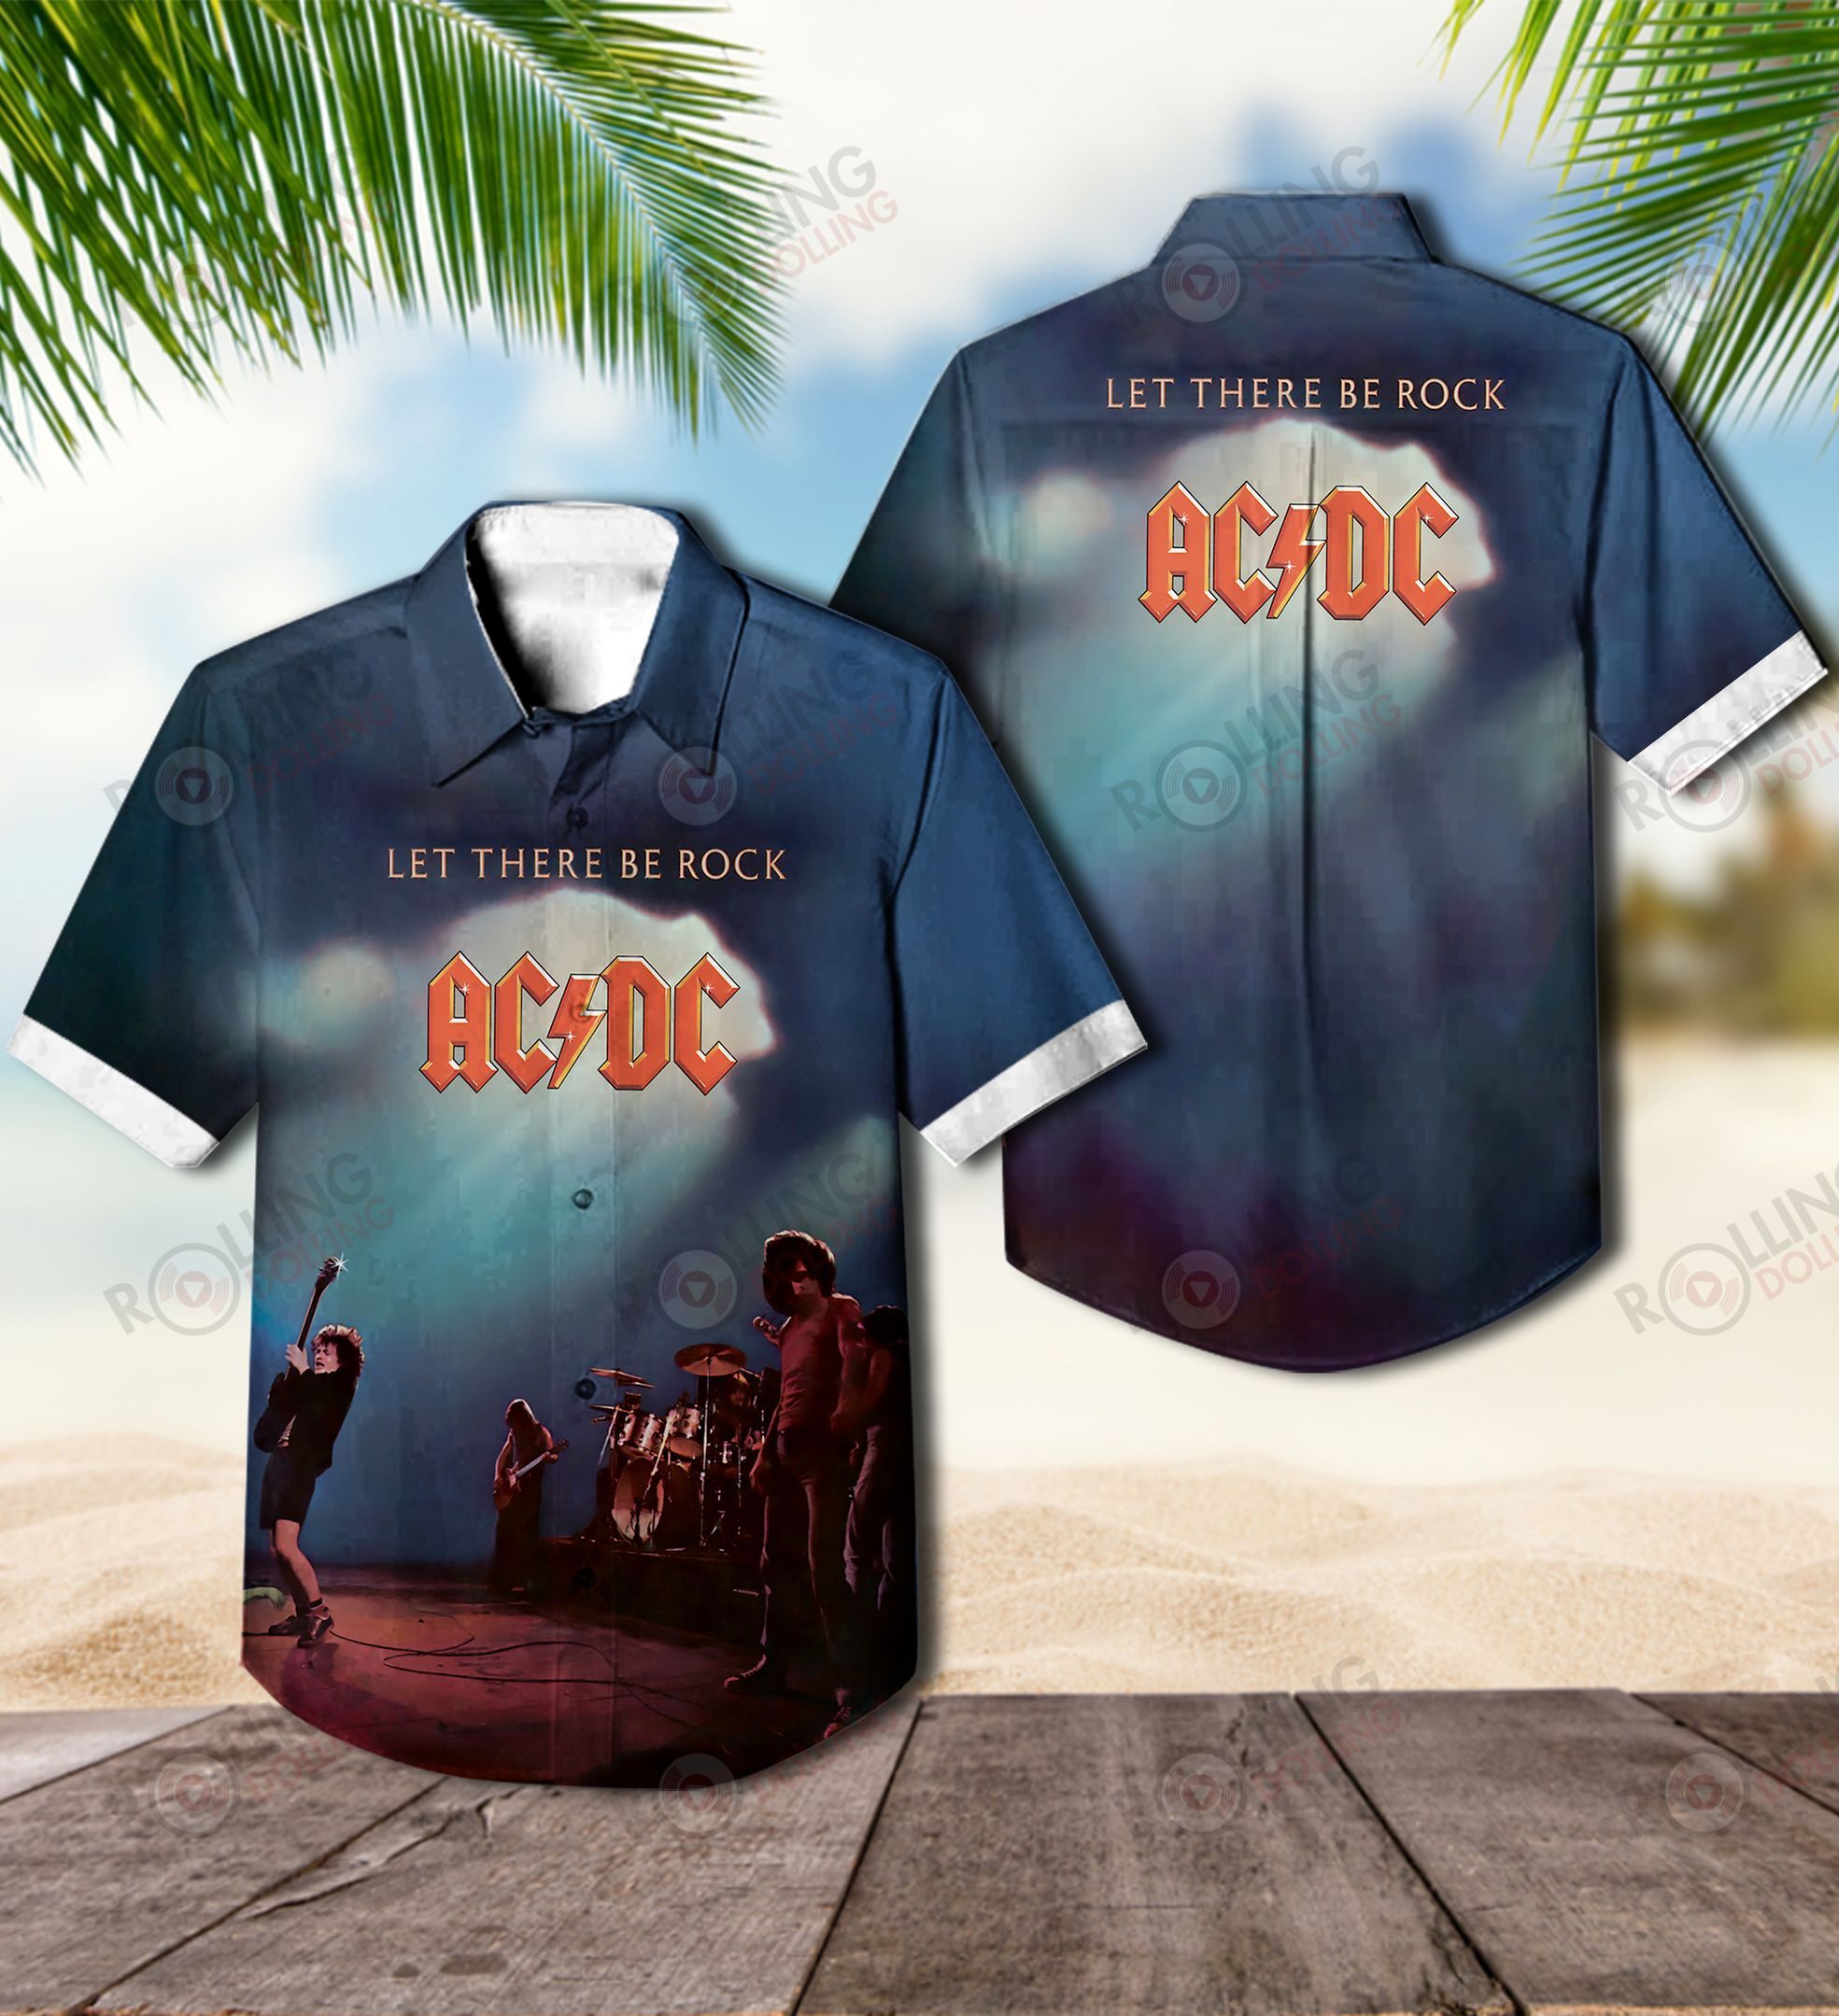 The Hawaiian Shirt is a popular shirt that is worn by Rock band fans 24